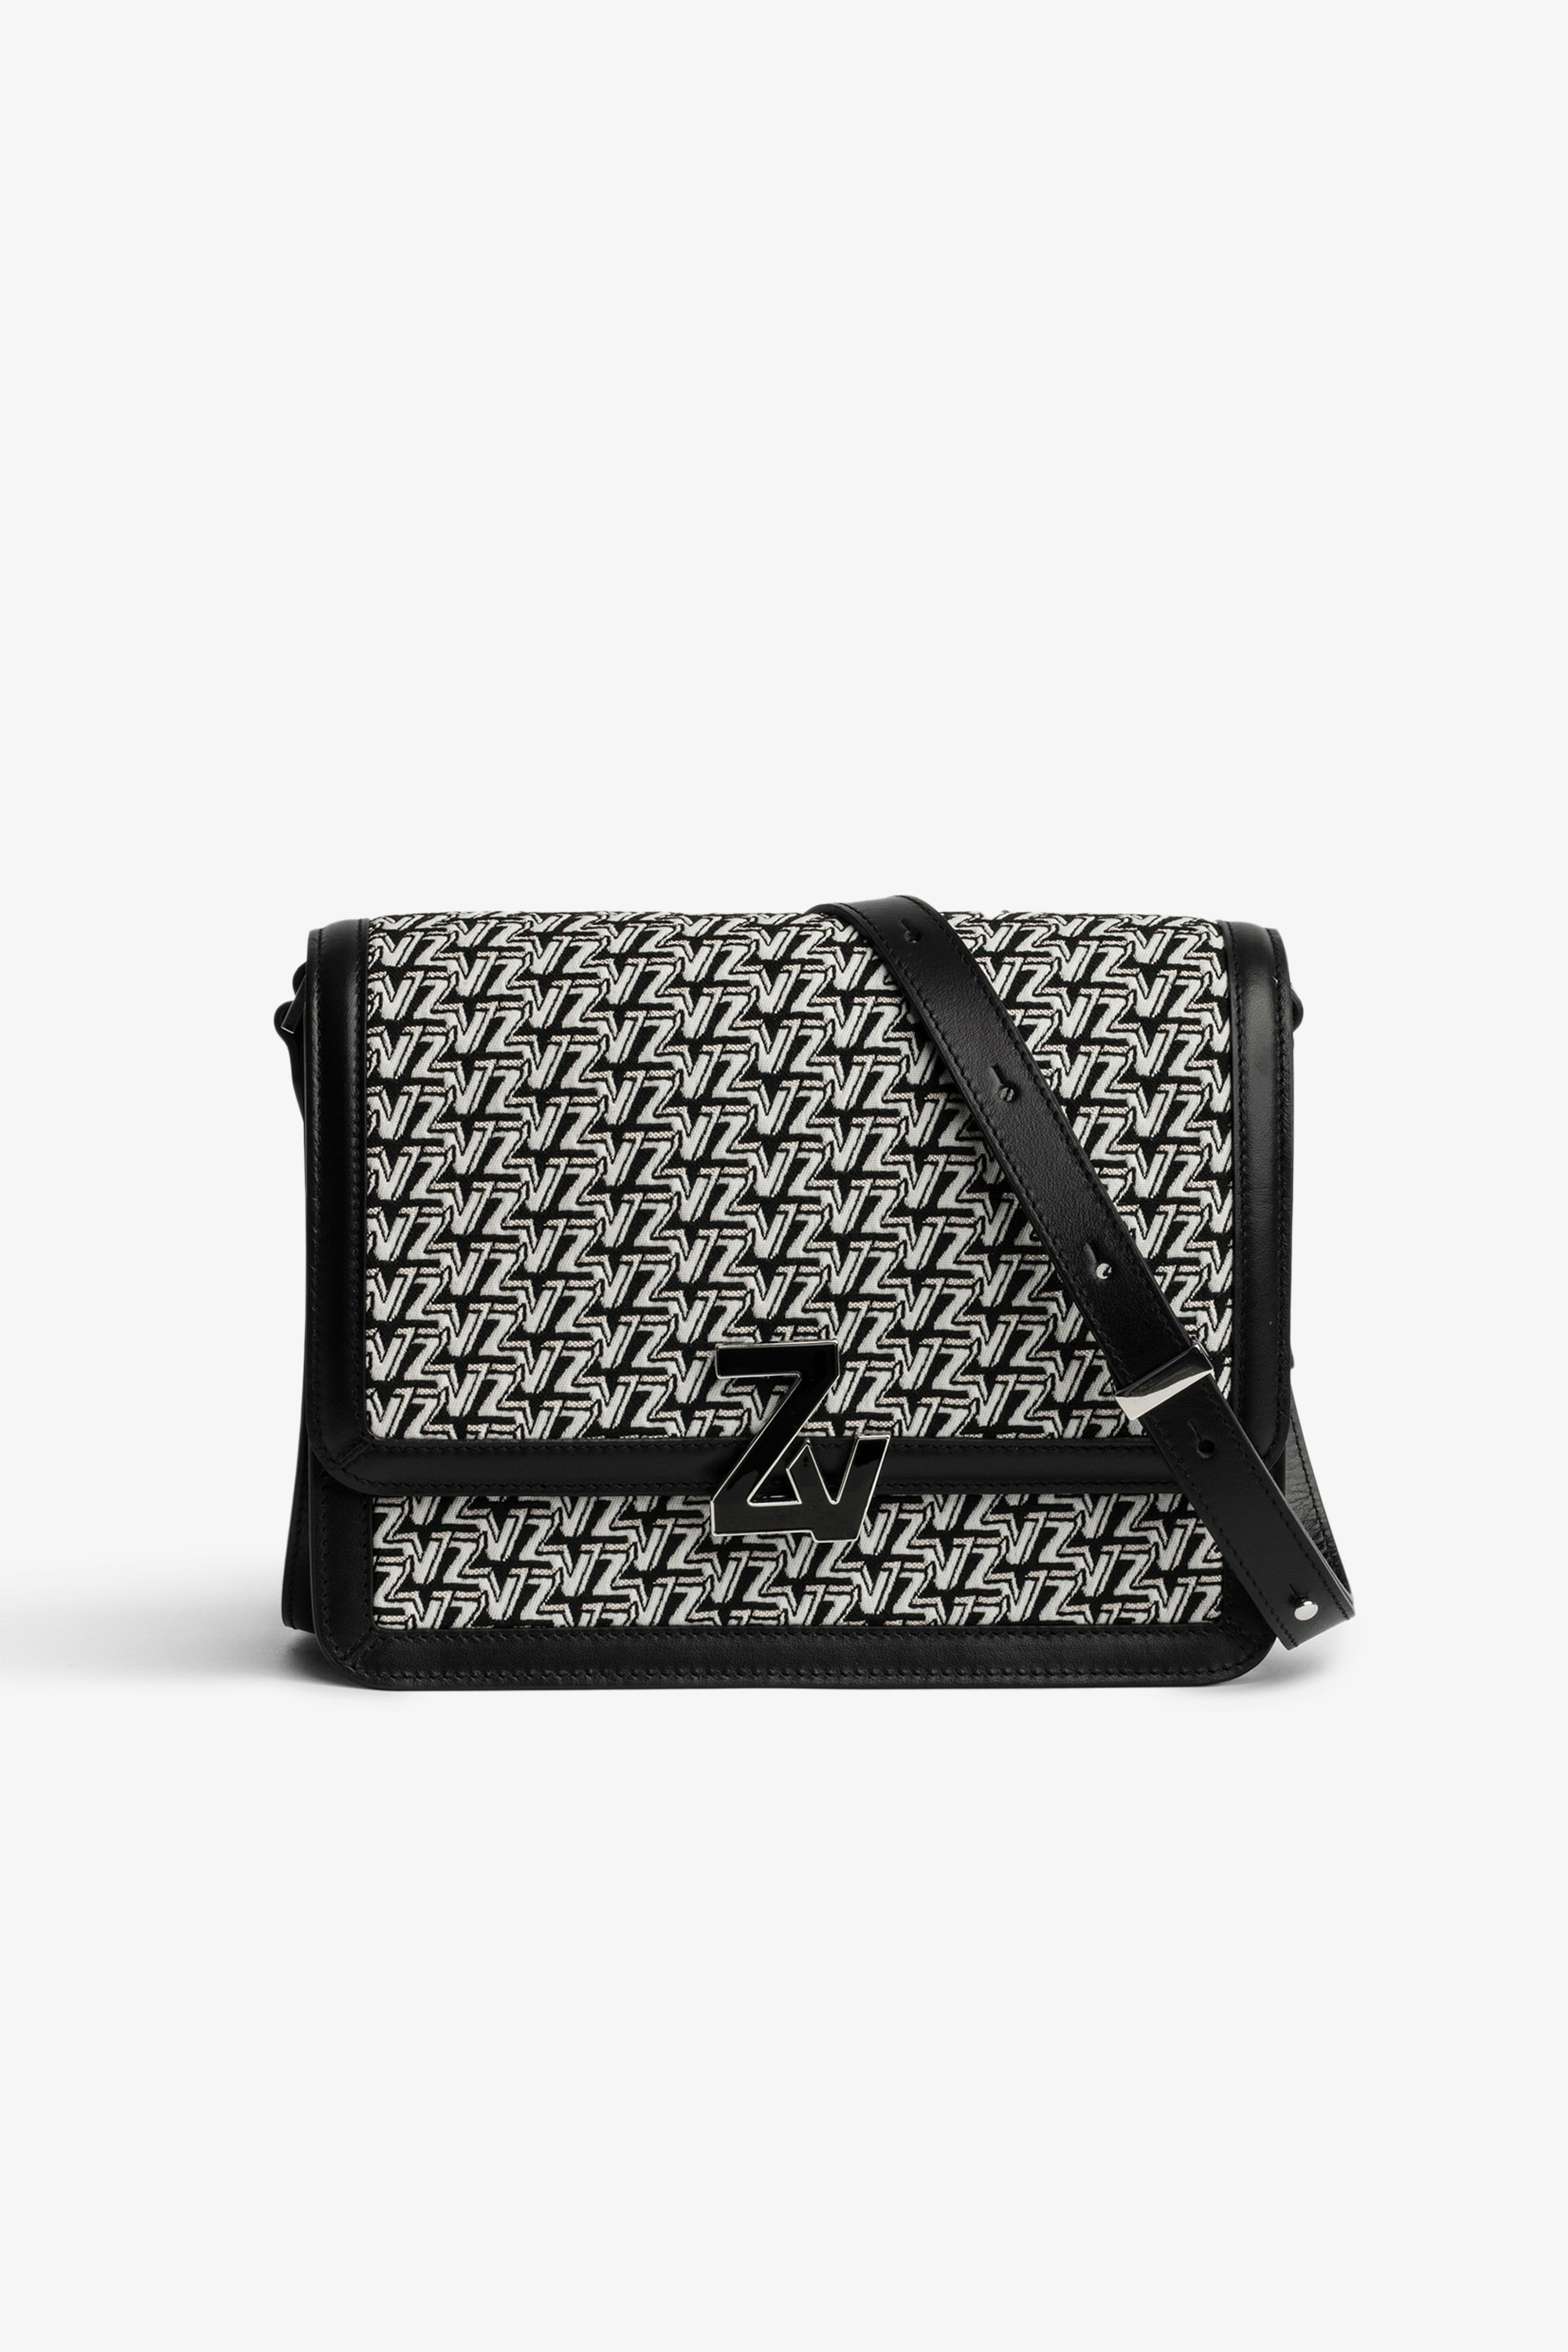 ZV Initiale Le City Monogram バッグ Women’s bag in black leather and ZV jacquard with flap and shoulder strap